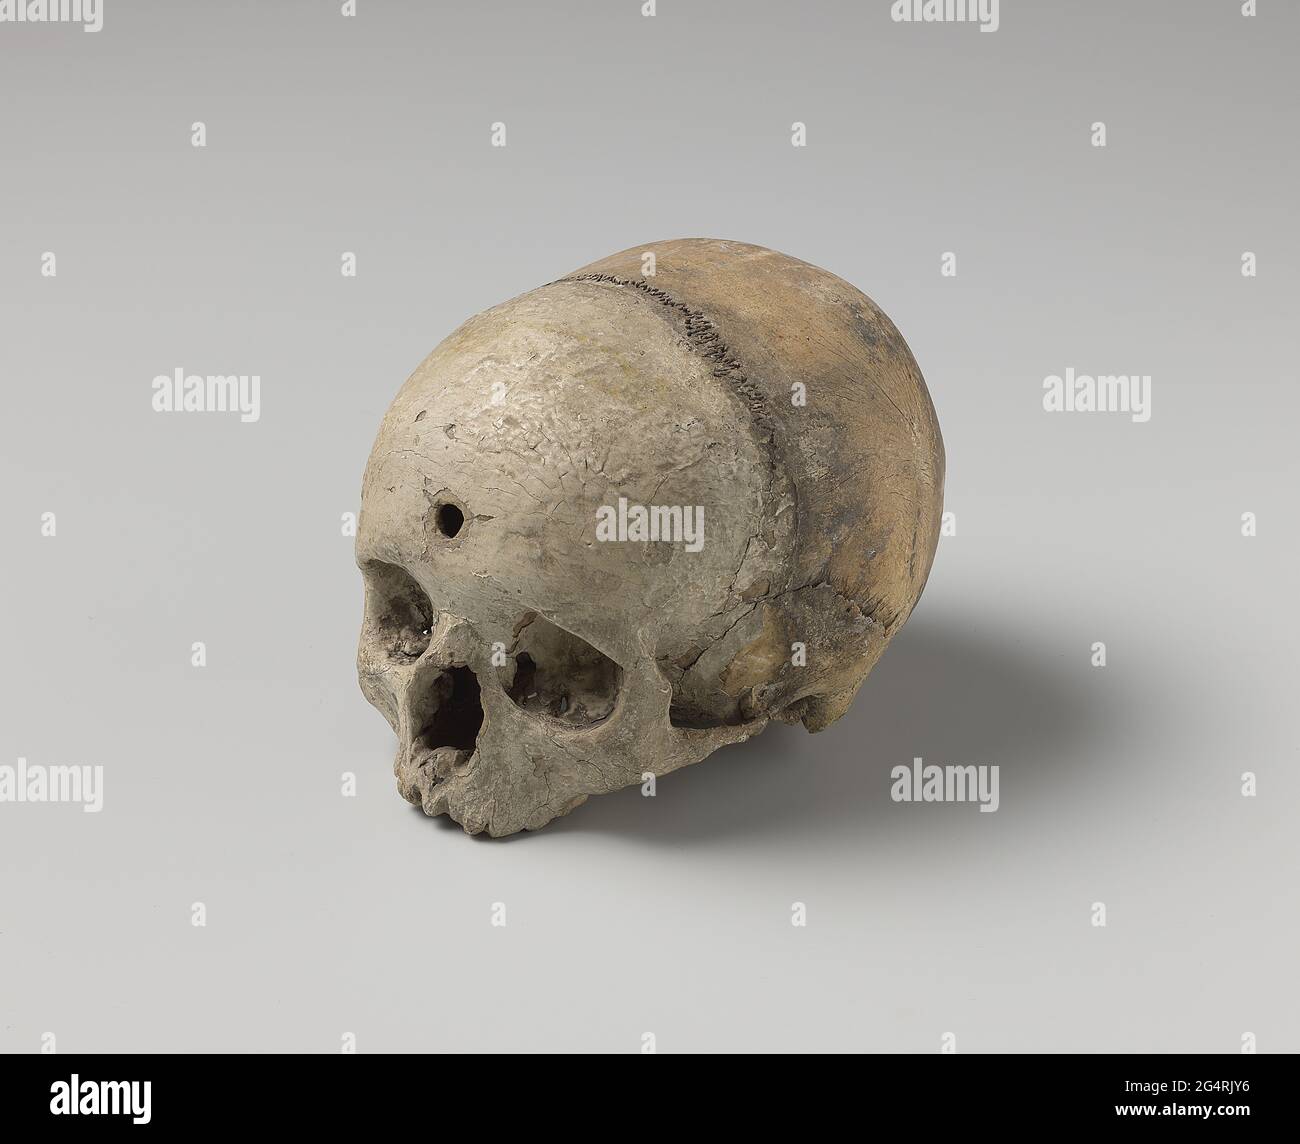 Skull belonging to the monument for Cristoffel Pullmann. A skull with hole in forehead. Stock Photo